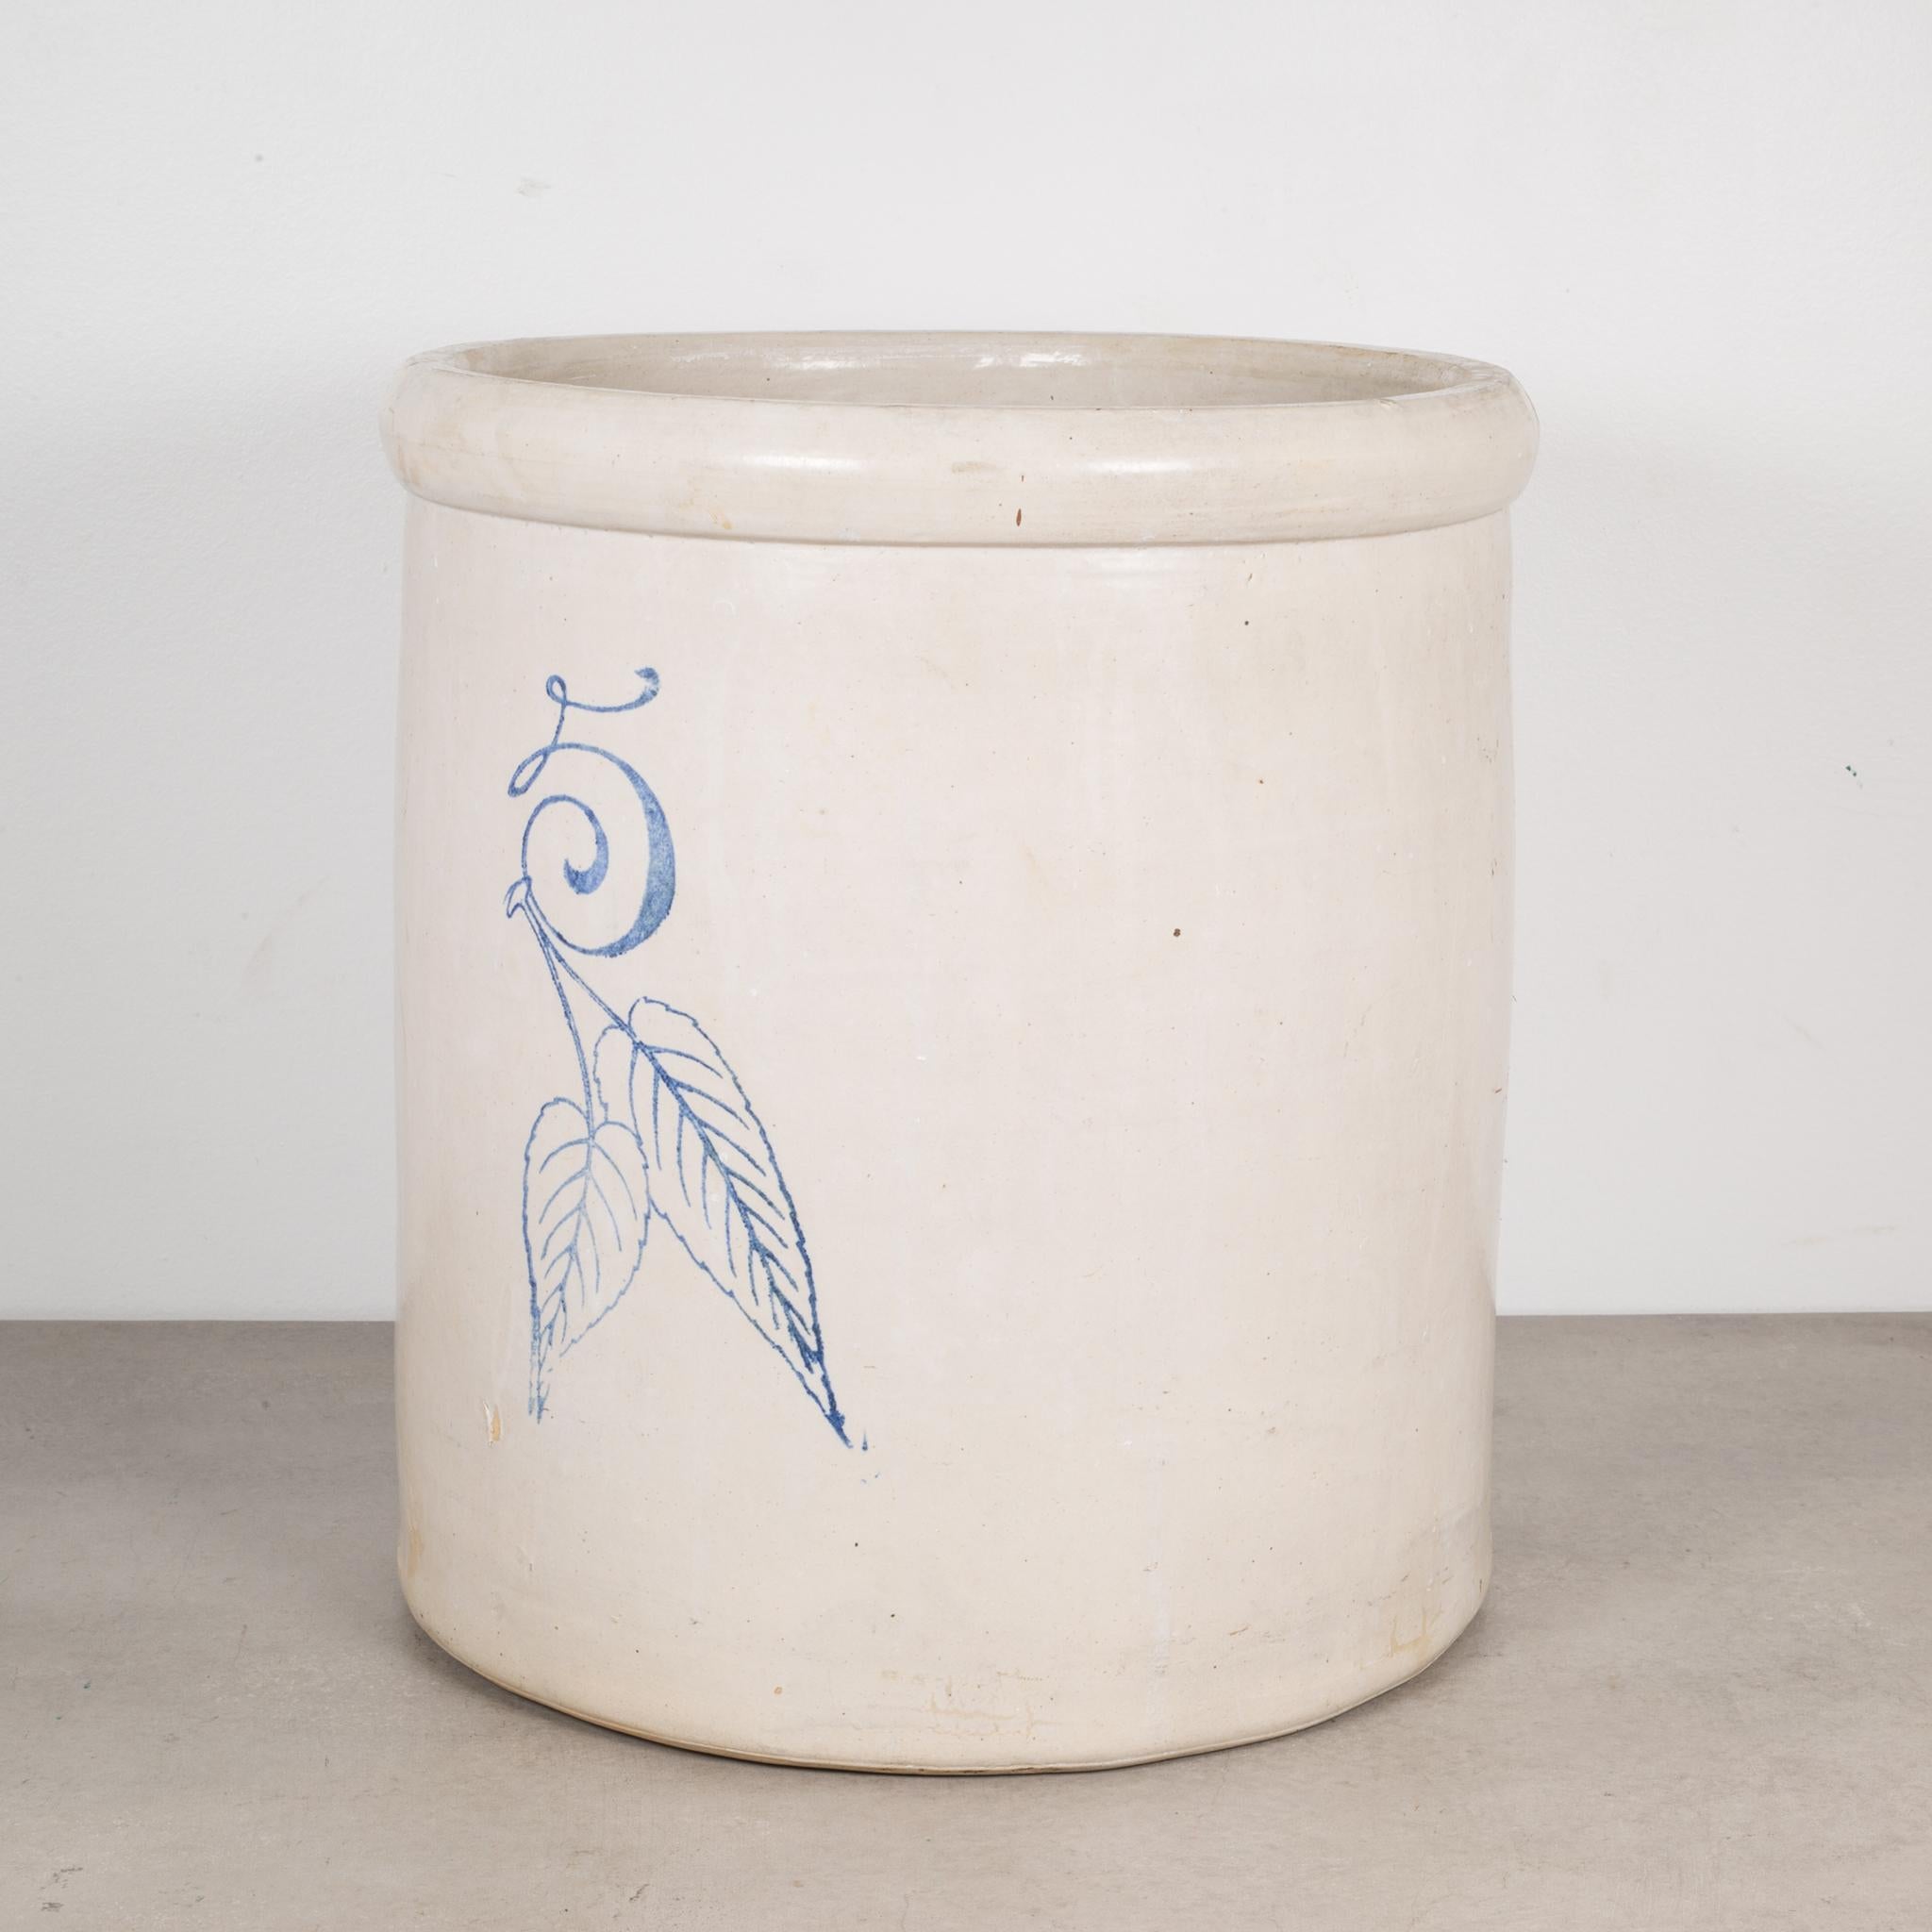 About

This is an original commercial 5 gallon crock manufactured by the Red Wing Union Stoneware Company, Minnesota USA. The piece has retained its original finish and is in excellent condition with appropriate patina for its age. 

Creator: